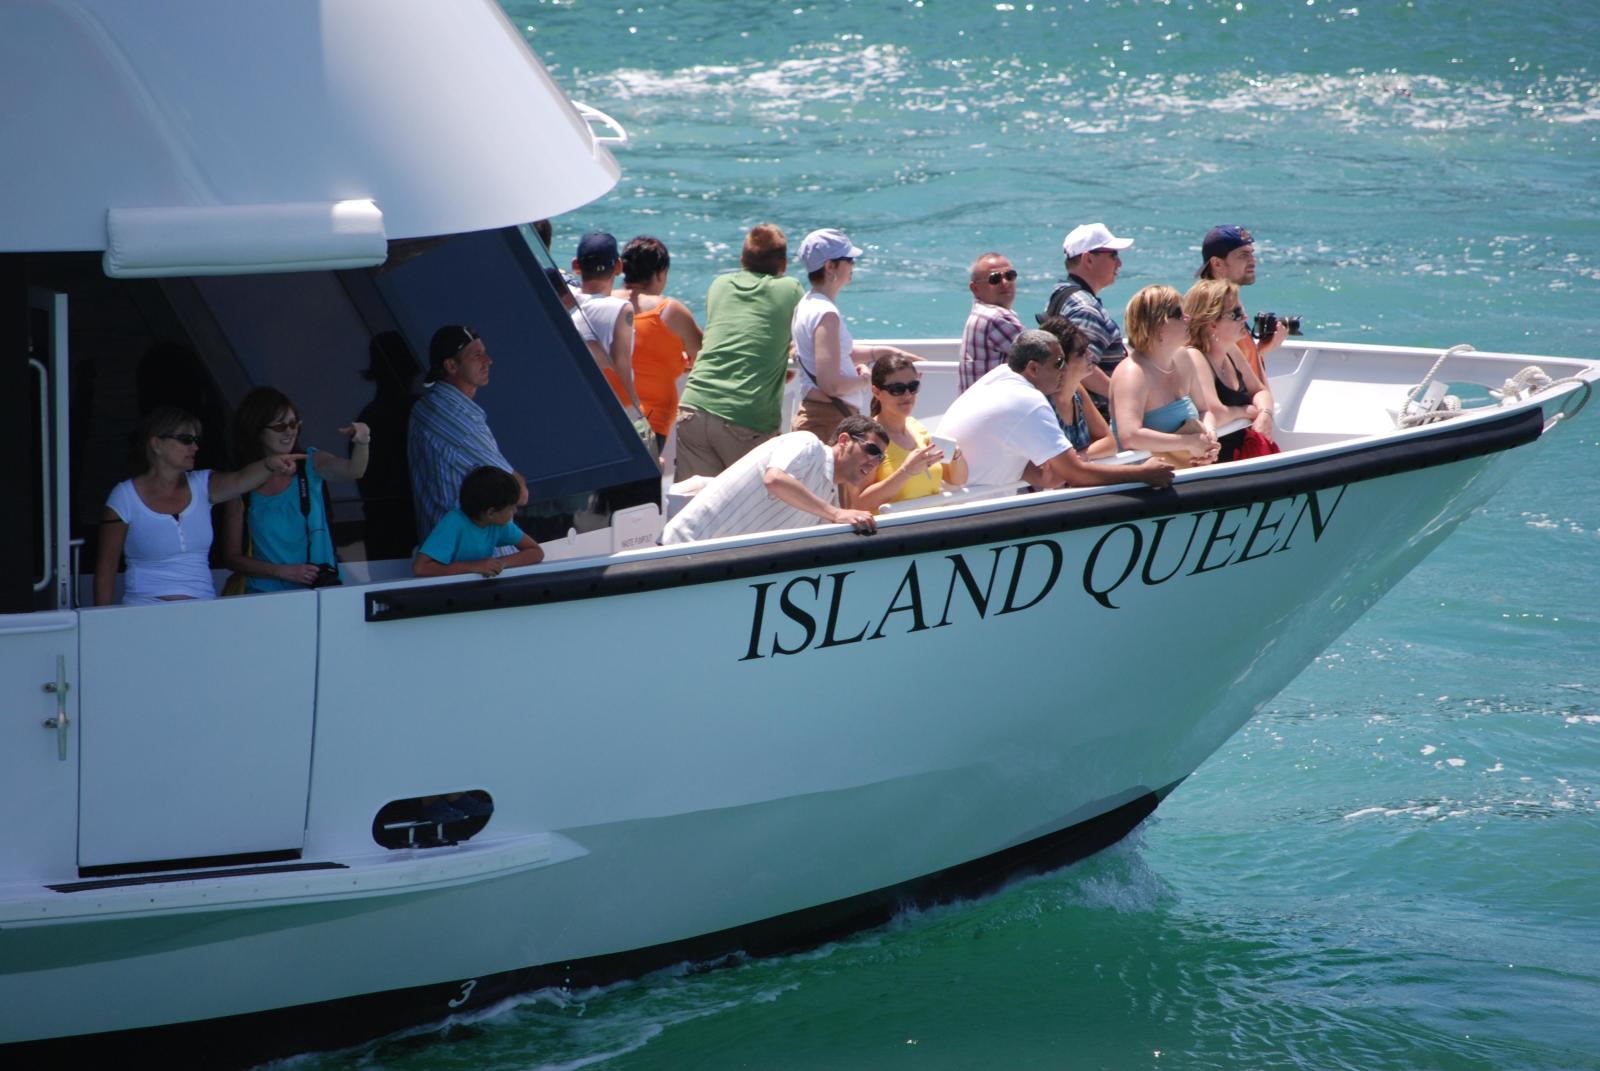 island queen cruises and tours